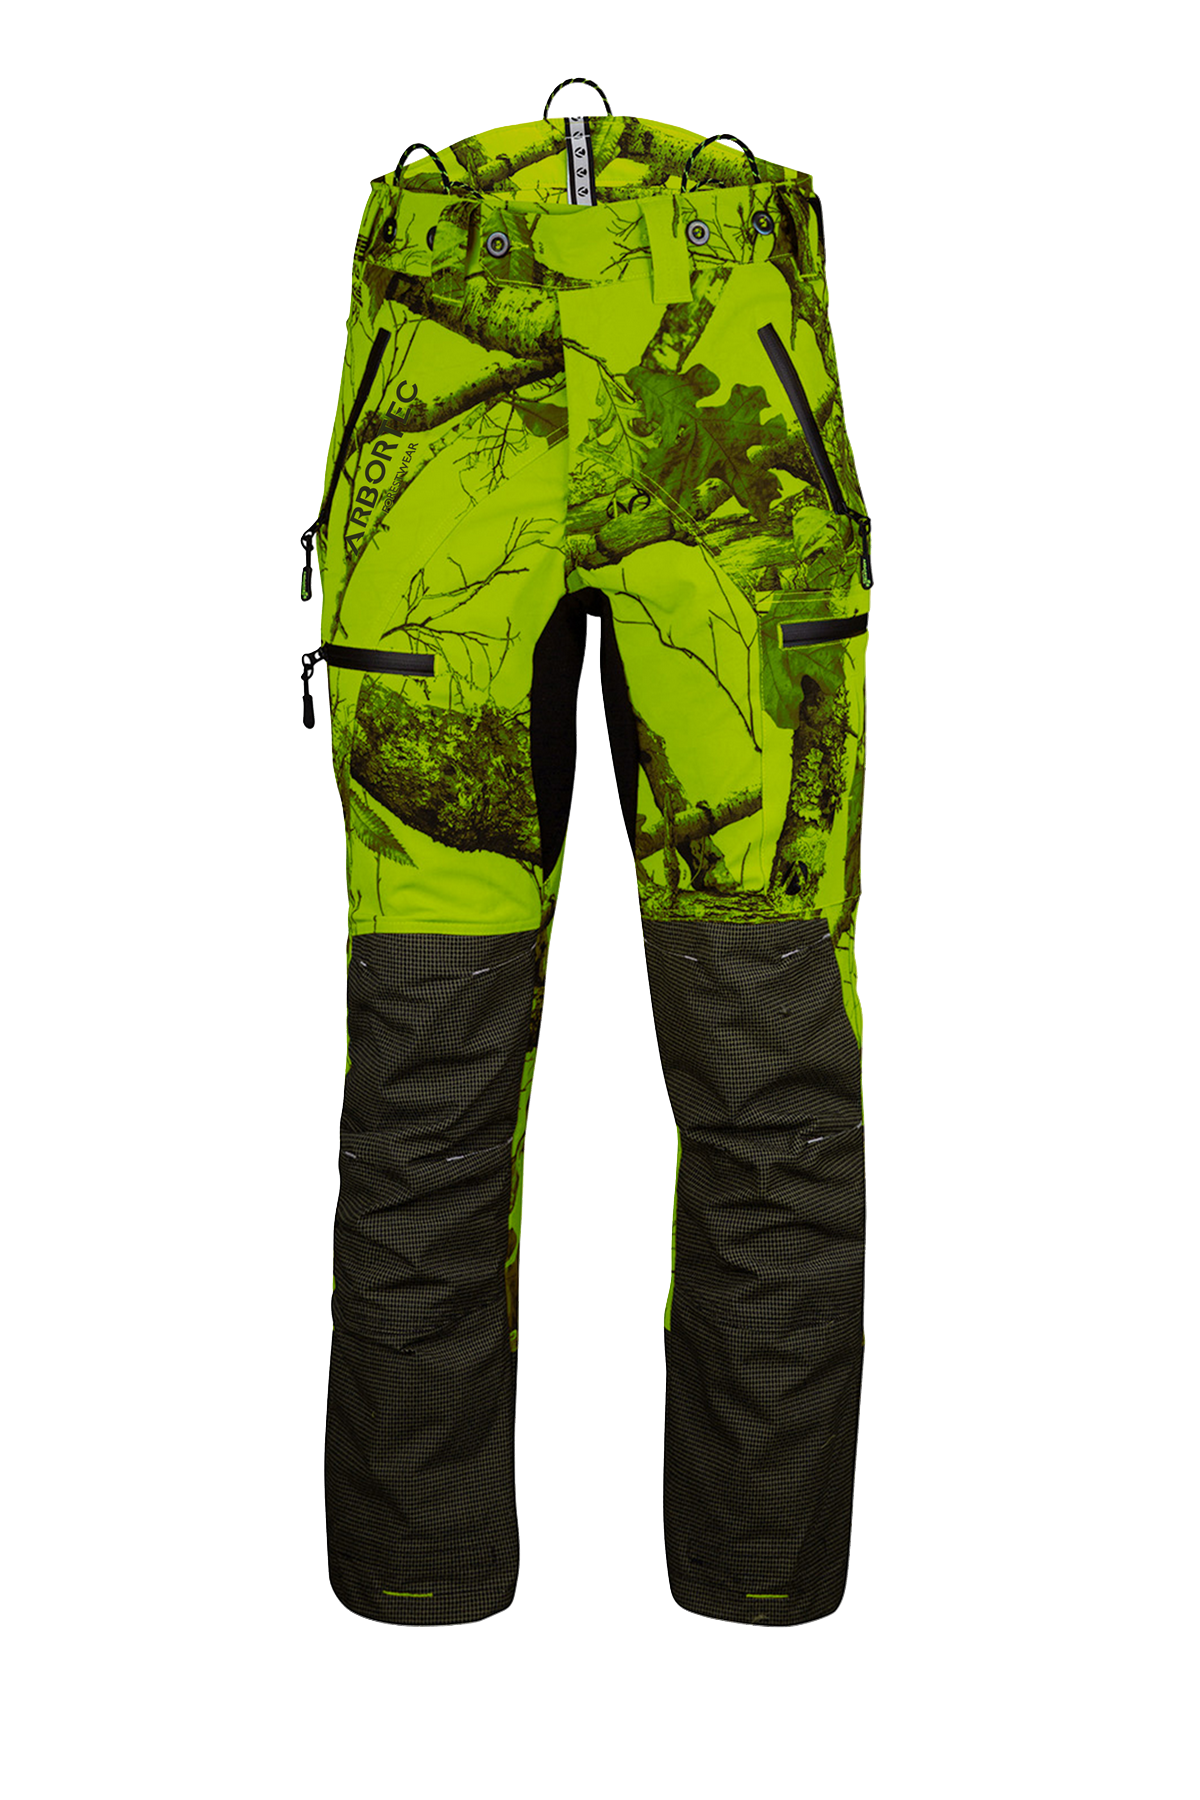 AT4060 - Breatheflex Pro Realtree Chainsaw Trousers Design A/Class 1 - Lime